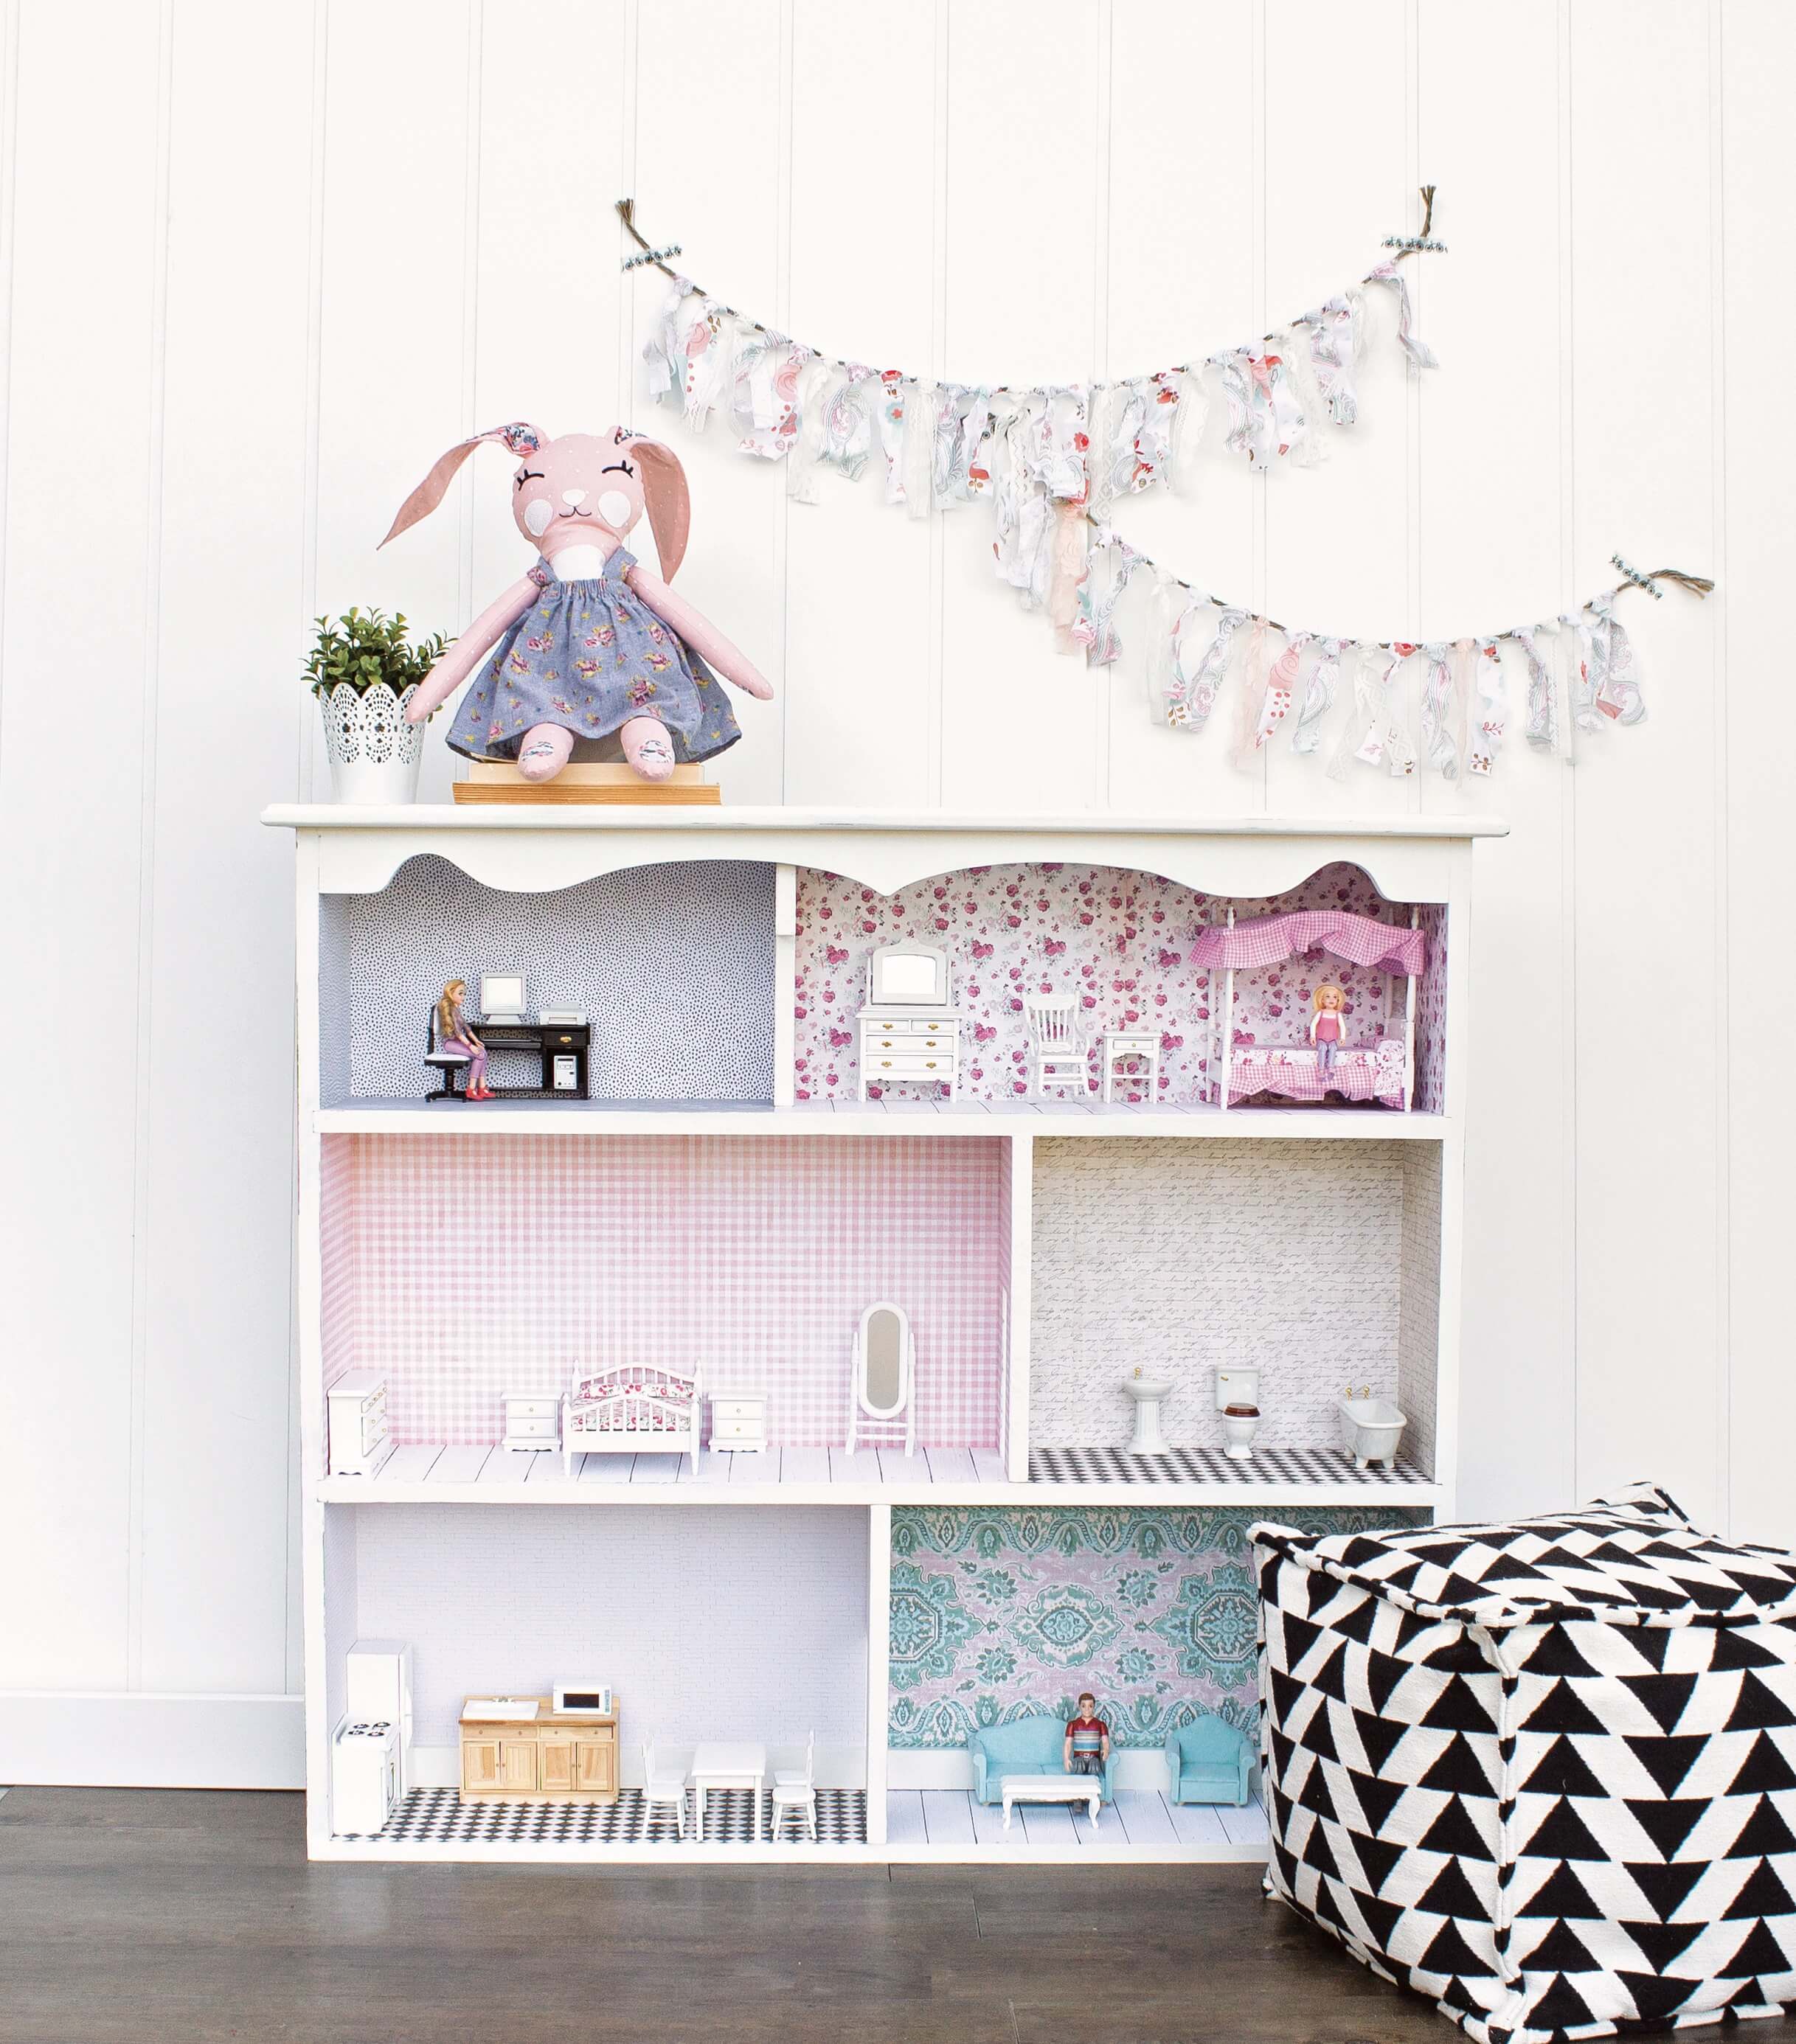 How to repurpose an IKEA Billy Bookcase into an adorable dollhouse inspired by the Amazing Furniture Makeovers book, a fun IKEA furniture hack idea!